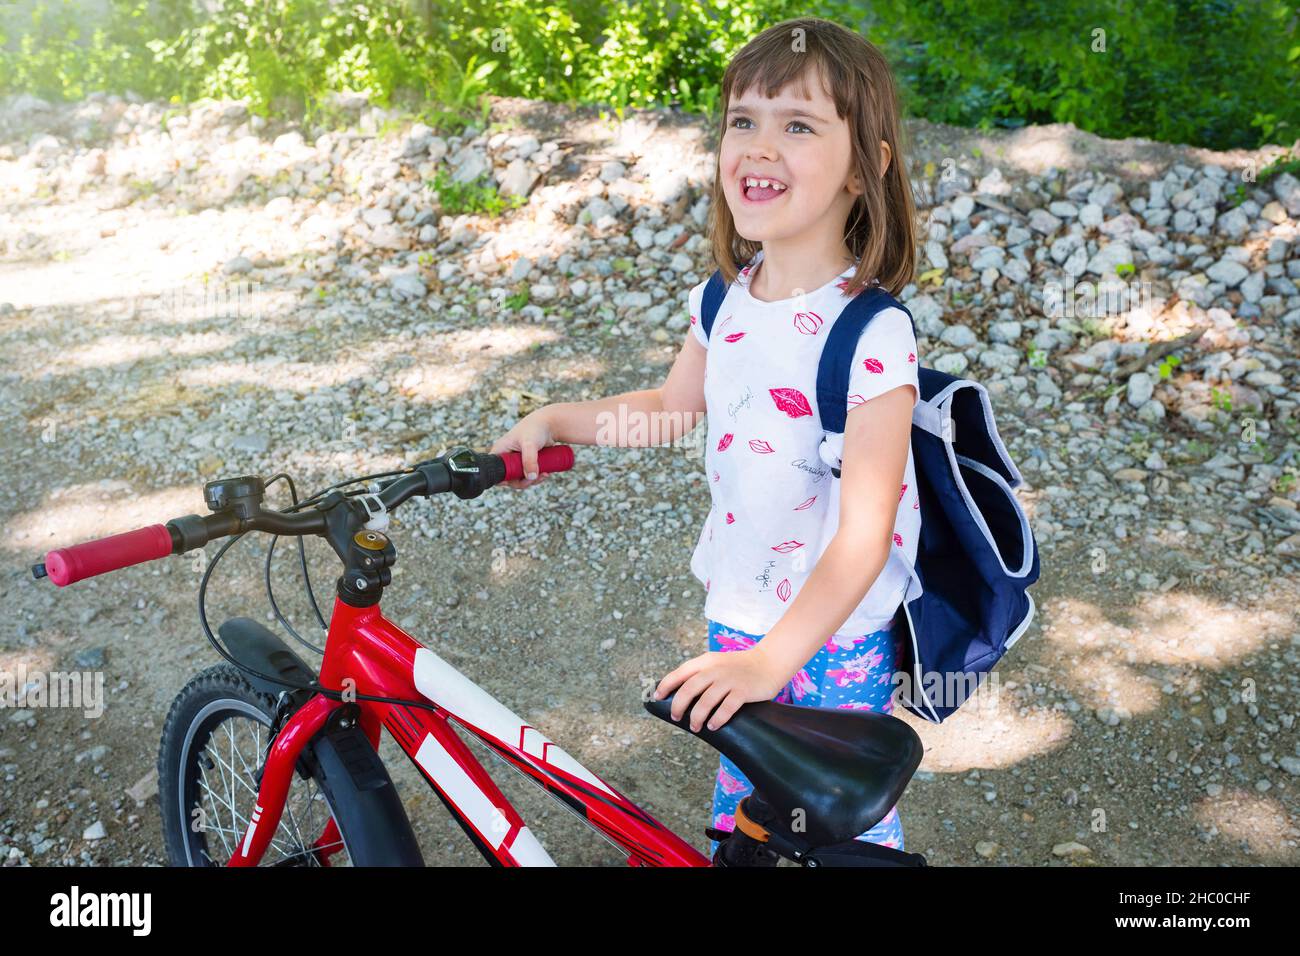 A portrait of a happy child with a backpack and bike on the street. Stock Photo